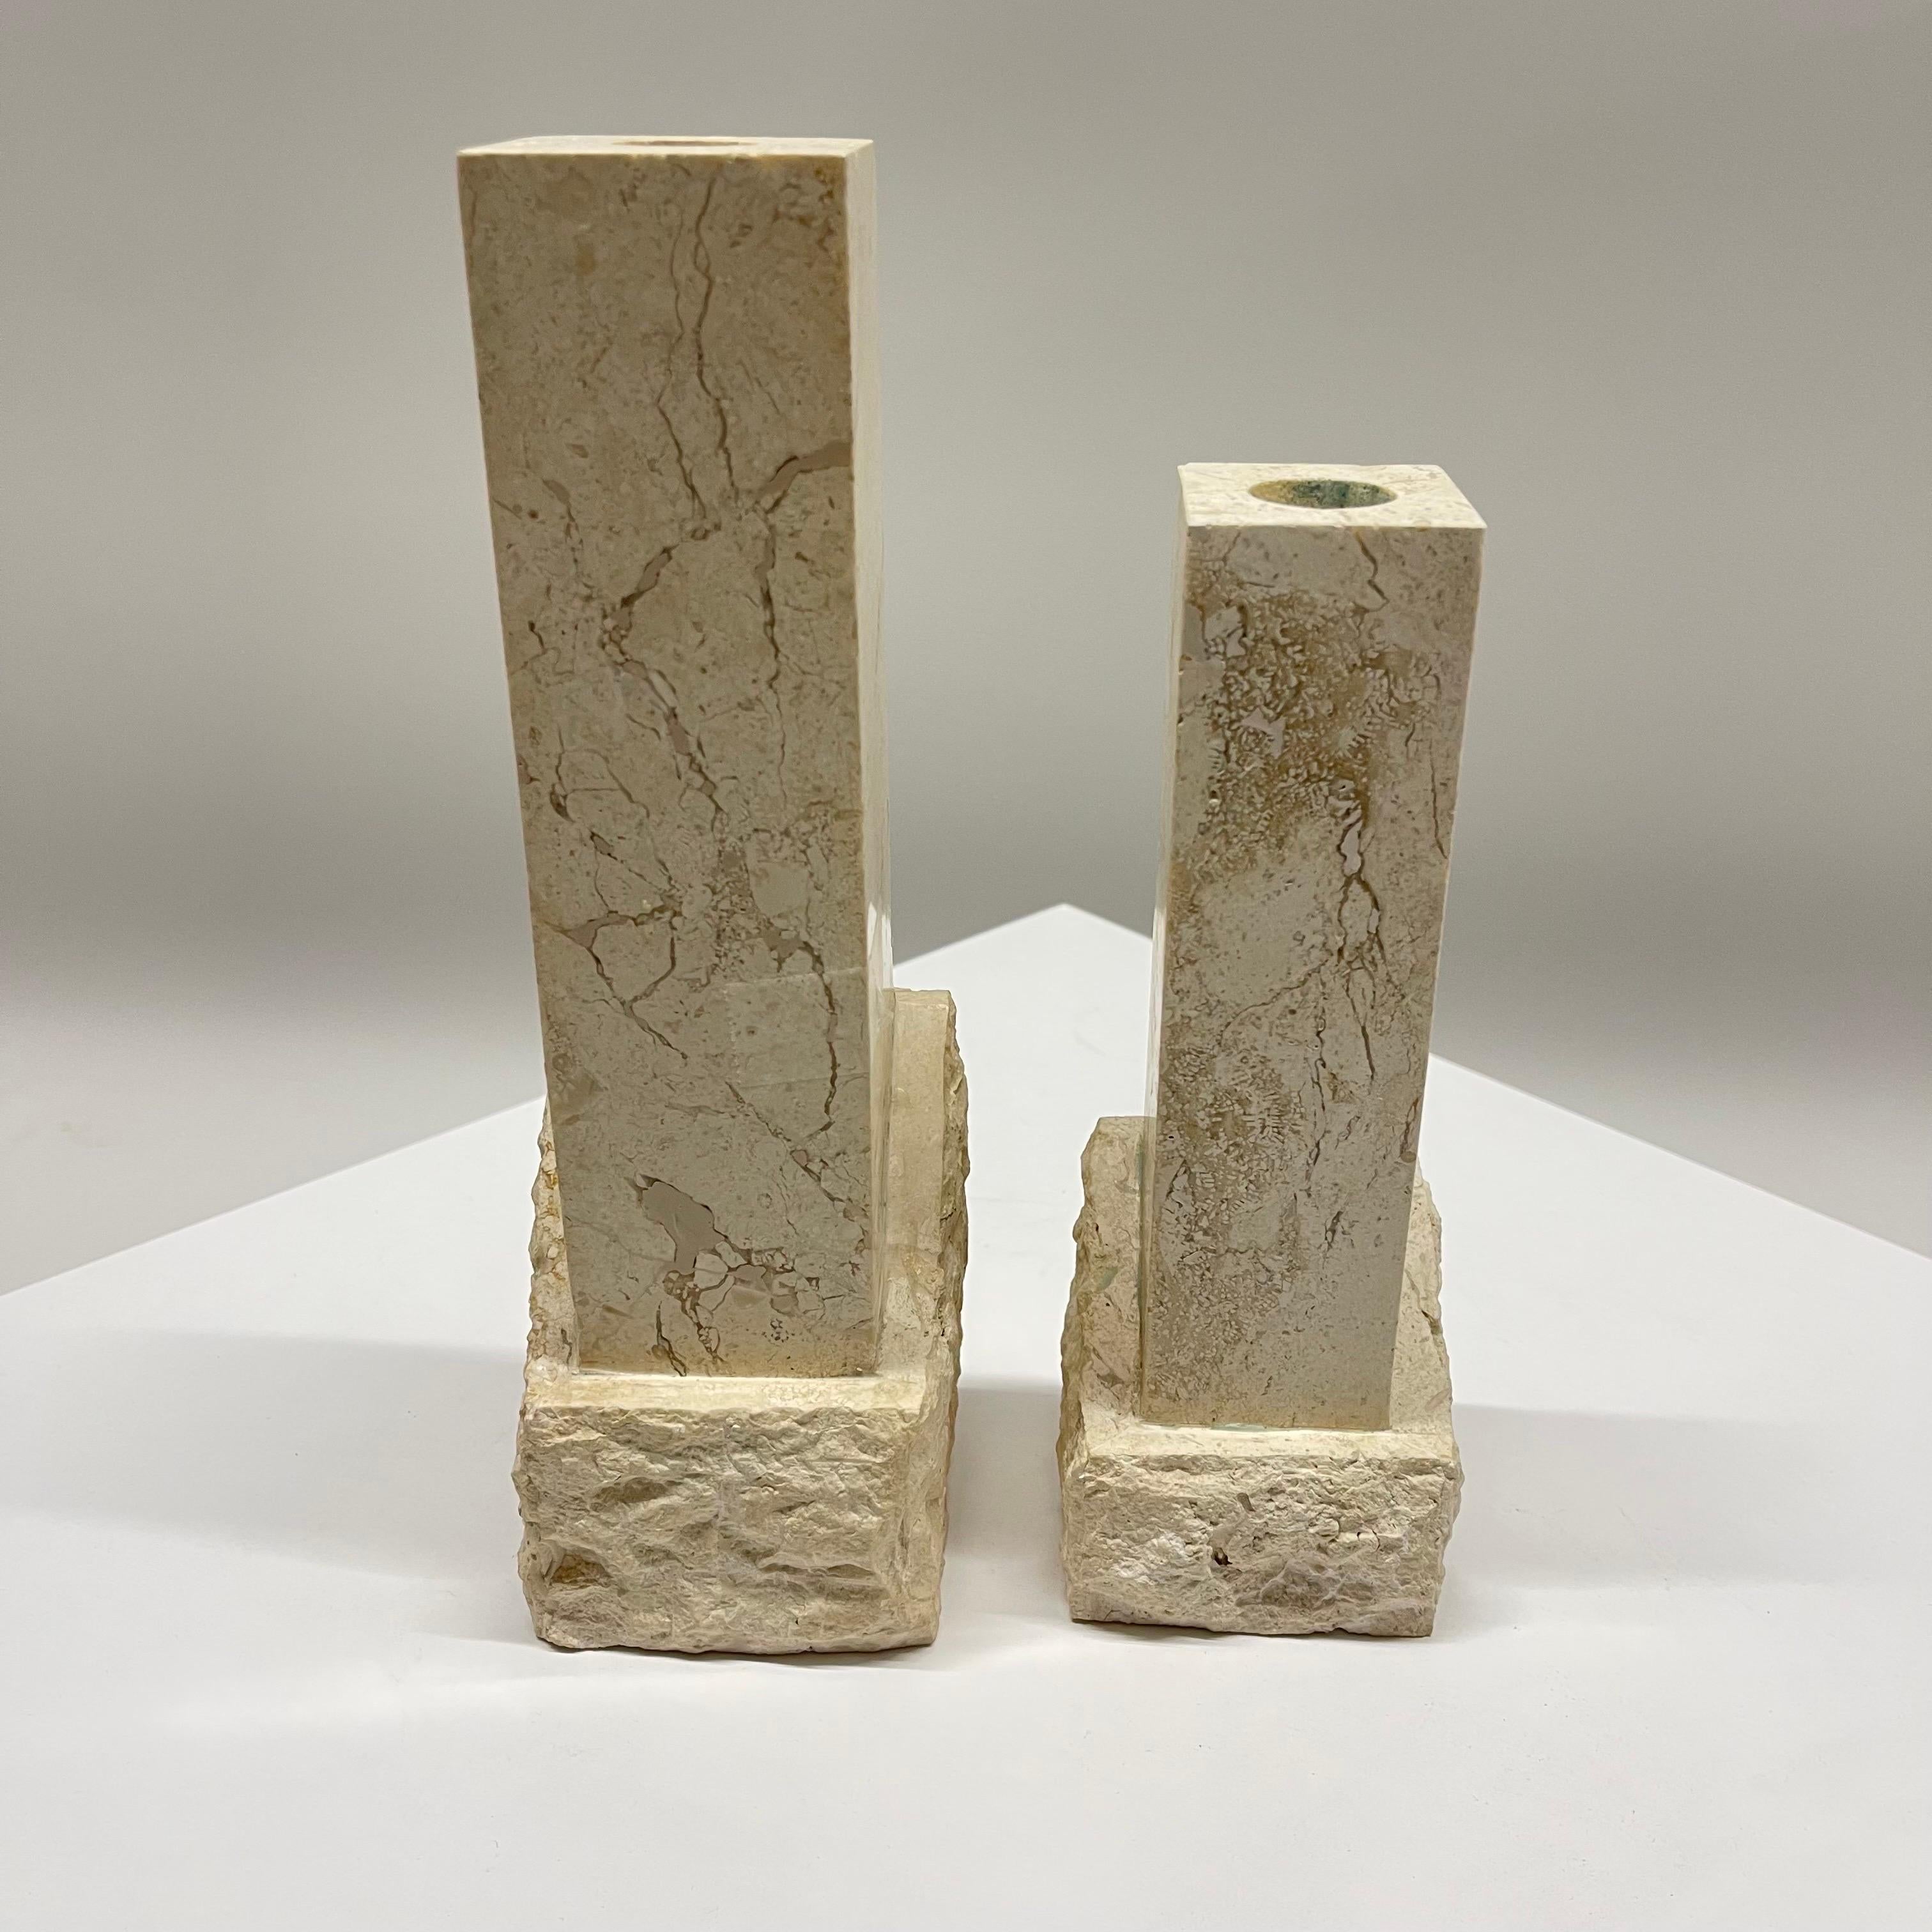 Exceptional asymmetrical pair of Post-Modern candlesticks or candle holders rendered in two textured tessellated travertine, both polished smooth as well as rough chiseled. Designed in Huntington Beach, CA and manufactured in the Philippines for